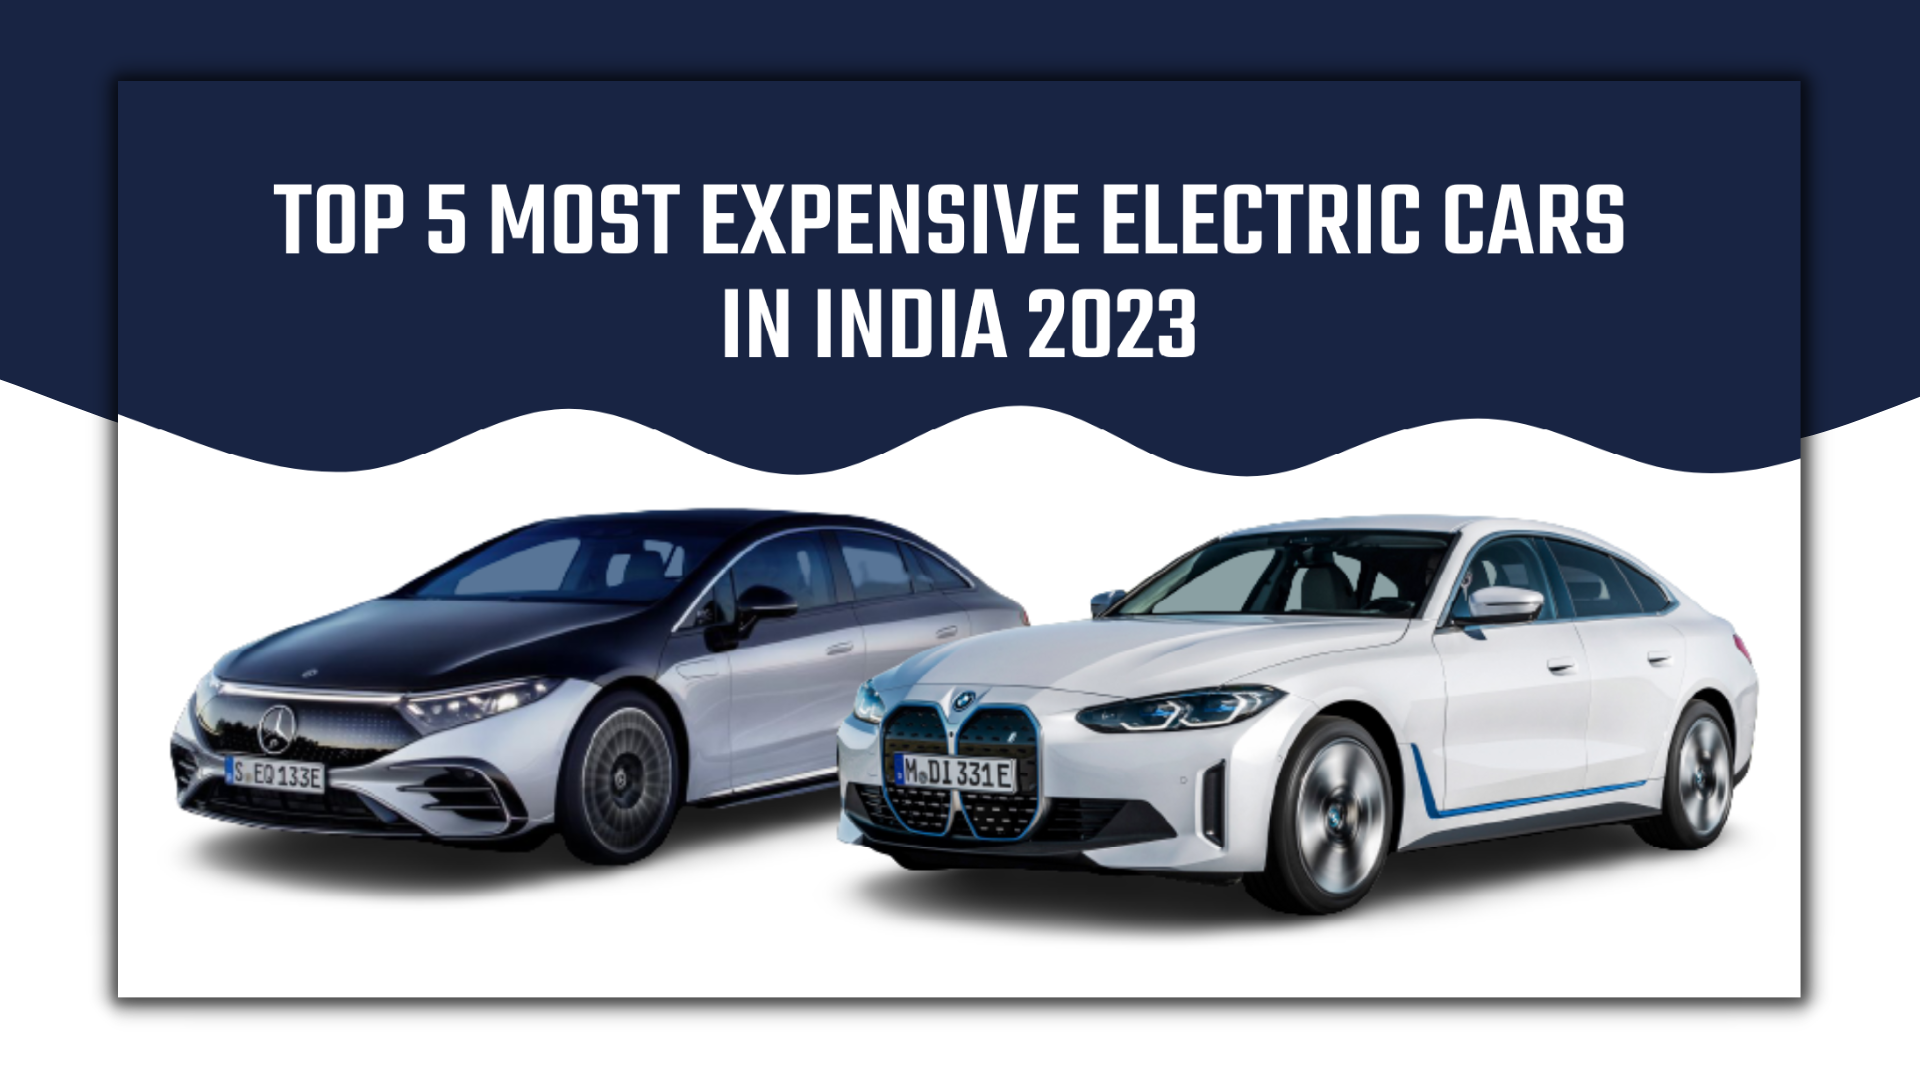 https://e-vehicleinfo.com/top-5-most-expensive-electric-cars-in-india-2023/